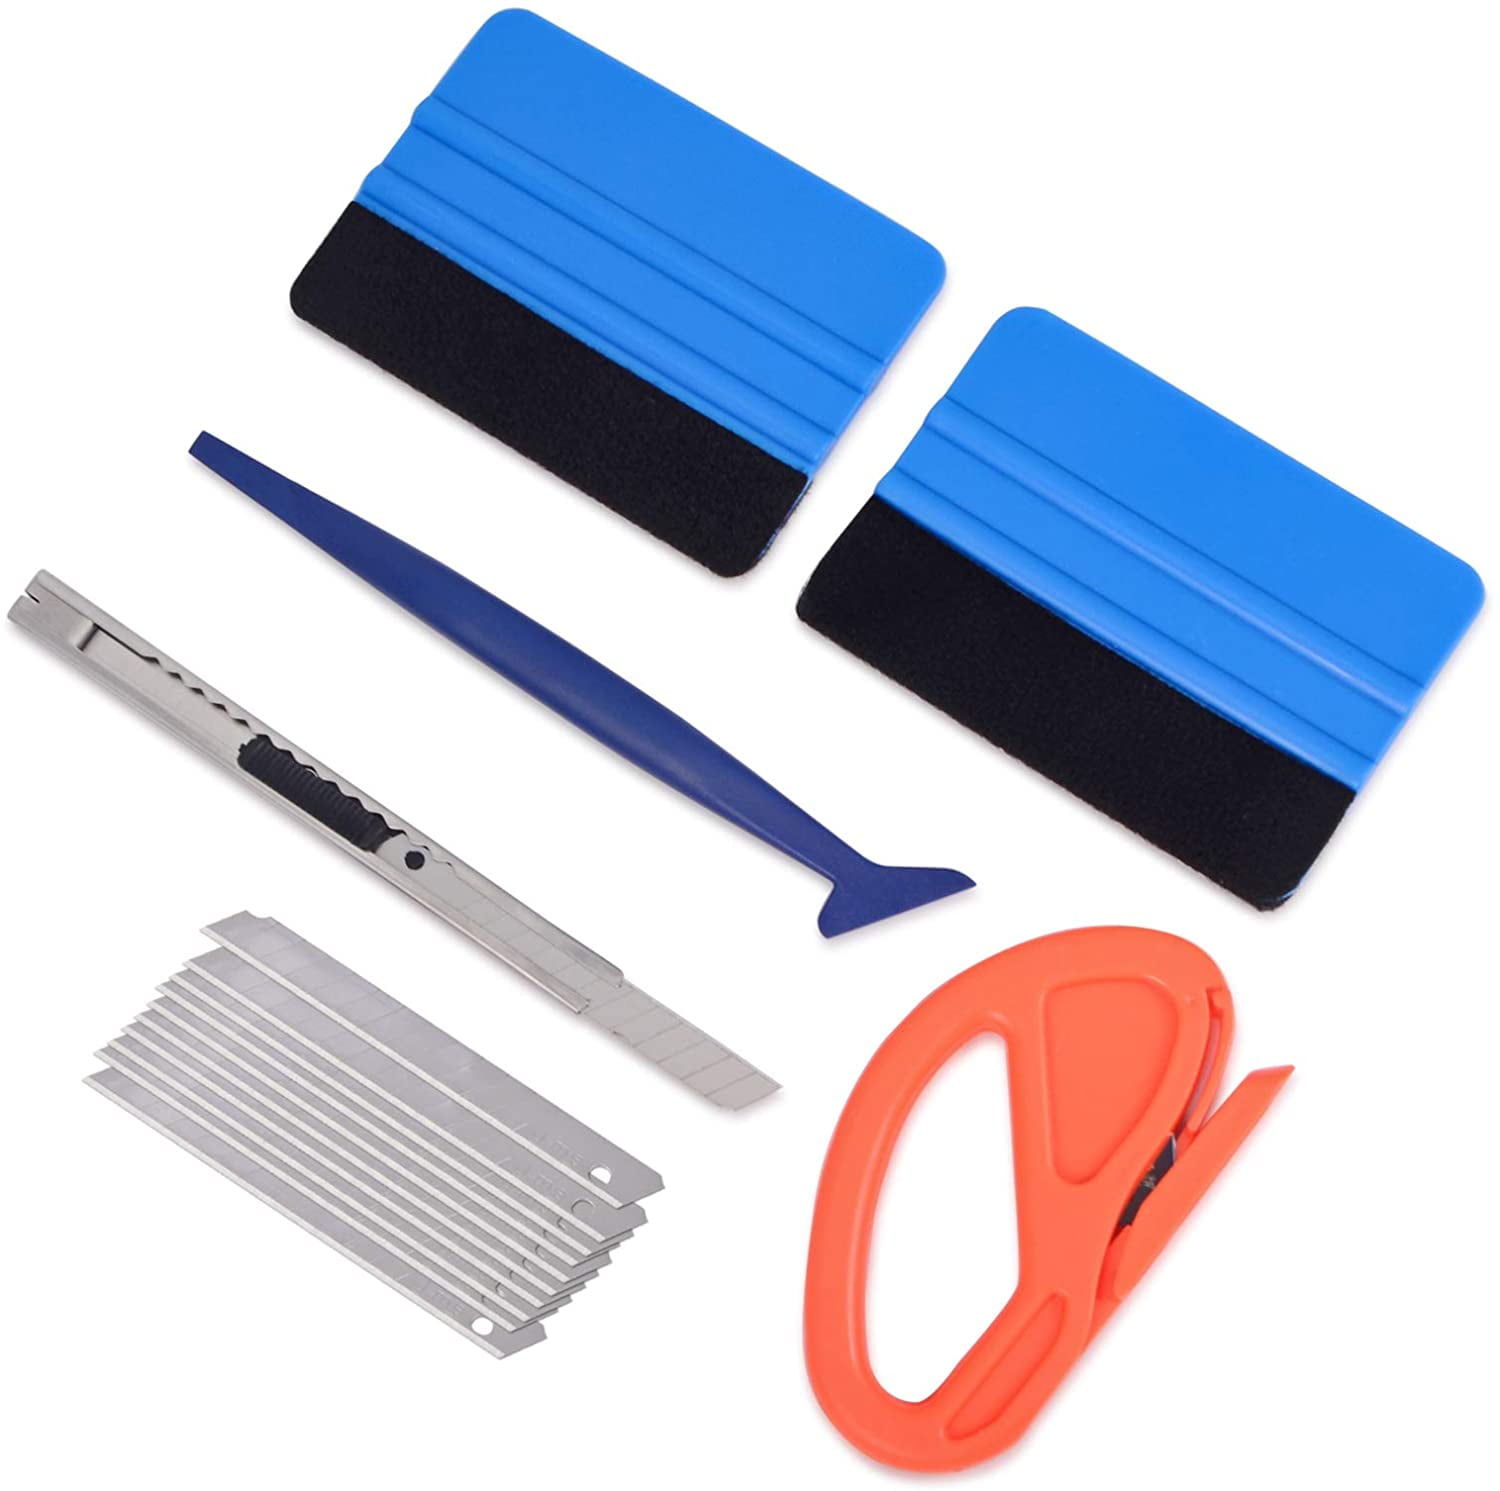 Auto Vinyl Wrap Starter Kit, Car Film Tool Tinting Kit with 2pcs Plastic Felt Squeegee, Retractable Utility Knife and 10pcs Snap-Off Blades, 7 in 1